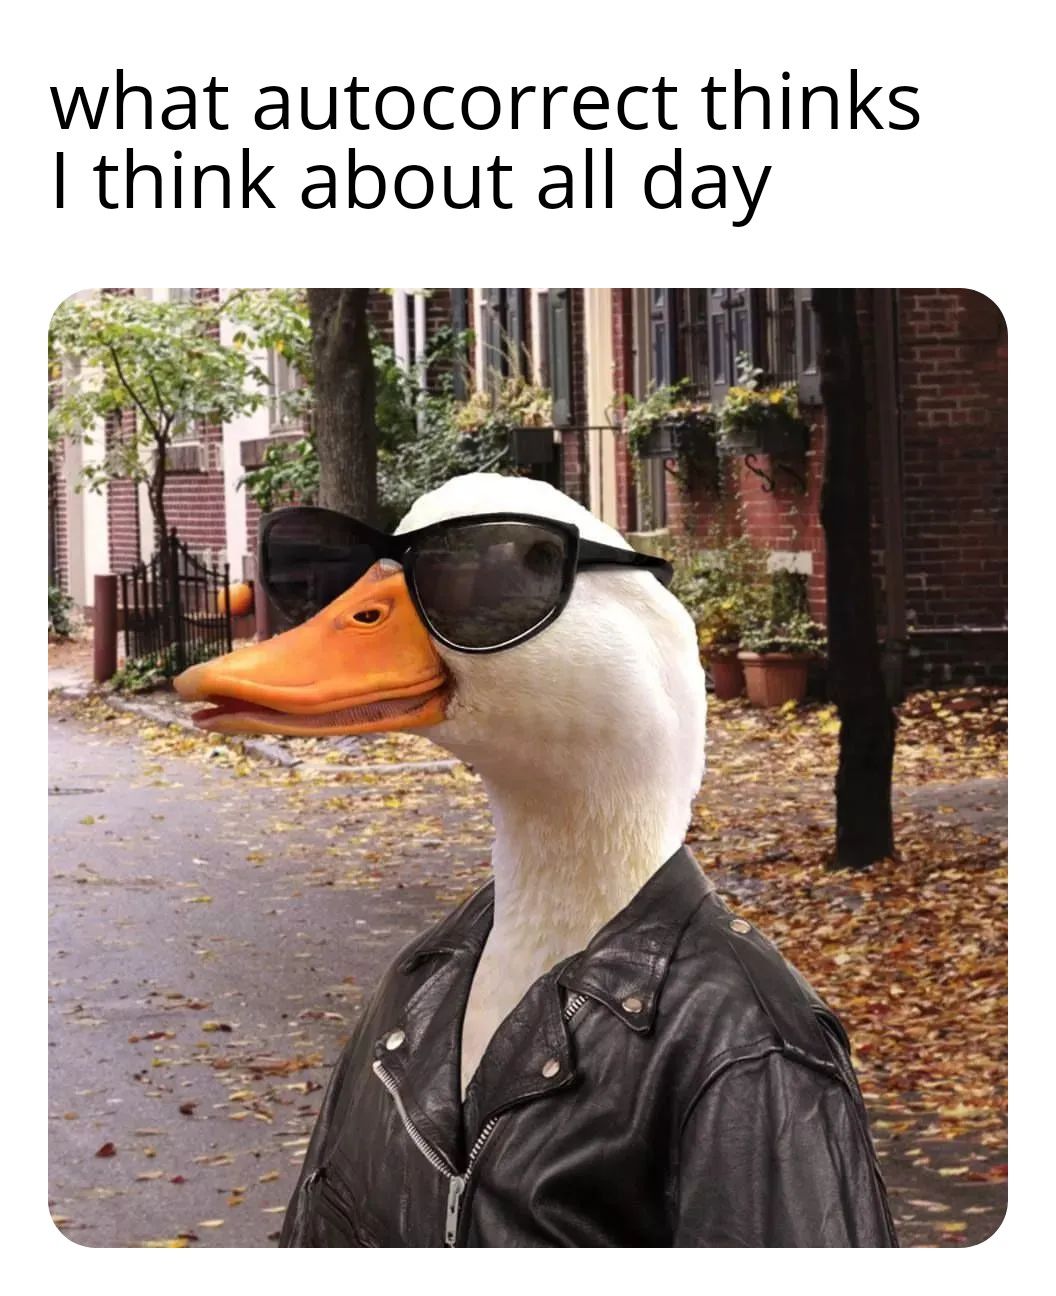 someone give me a good duck